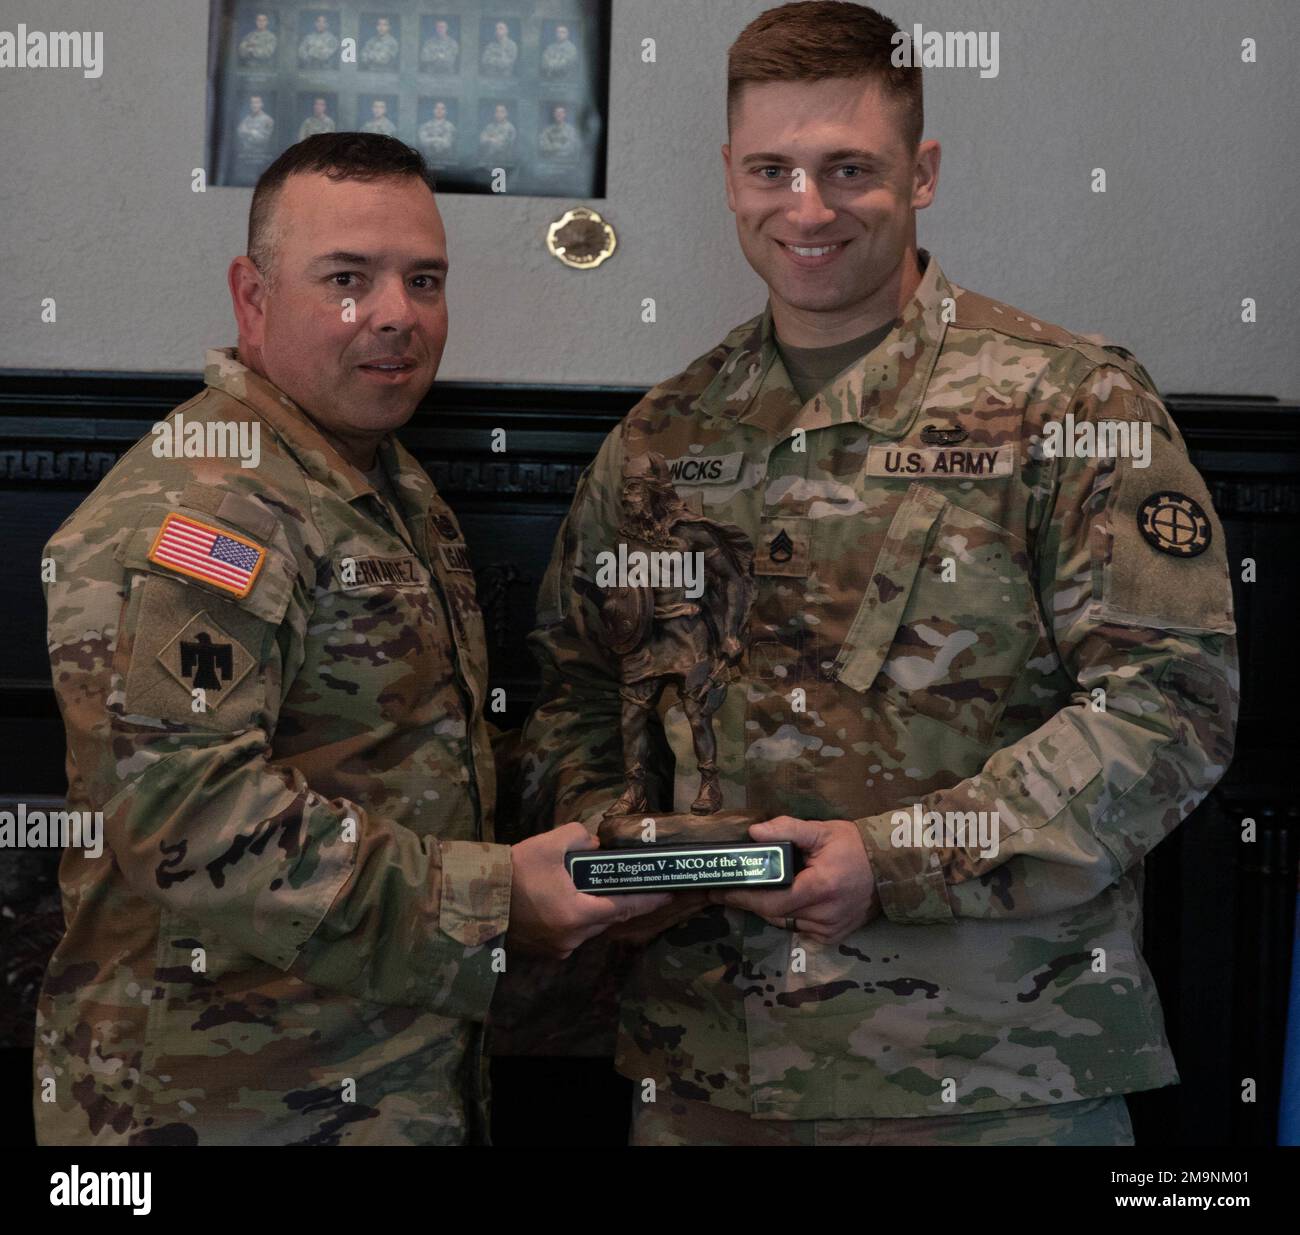 Staff Sgt. Michael Lincks, Missouri National Guard, receives a trophy from Command Sgt. Major John Hernandez, Oklahoma state command sergeant major, for being named the Region V Noncommissioned Officer of the Year in the National Guard Region V Best Warrior competition during an award ceremony in Oklahoma City, May 20, 2022.  Soldiers from across six states tested their physical and mental proficiency to earn the title Best Warrior at Camp Gruber Training Center, near Braggs, Okla., May 15-20, 2022. (Oklahoma National Guard photo by Spc. Caleb Stone) Stock Photo